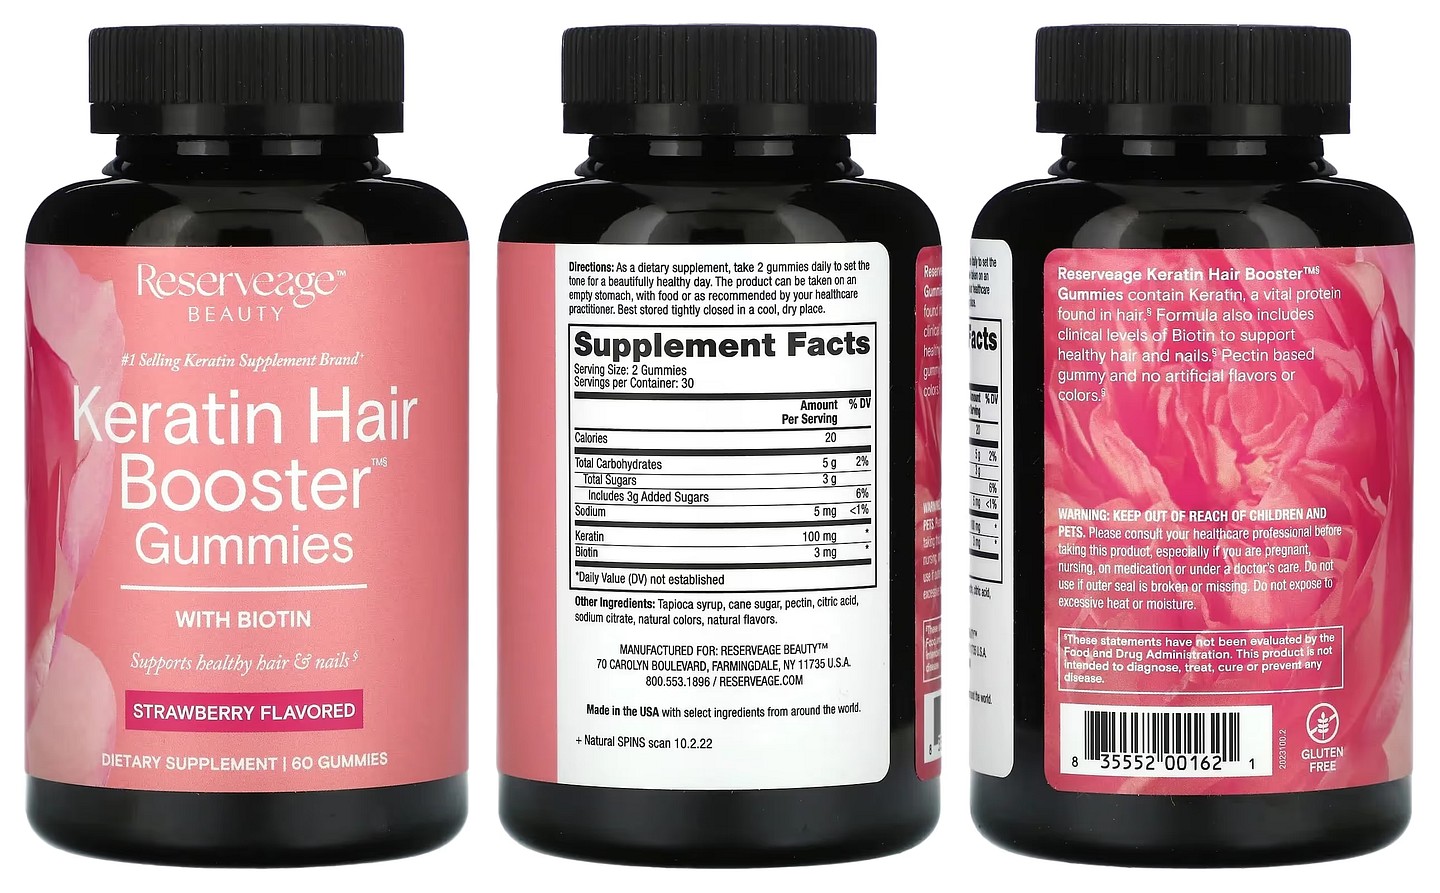 Reserveage Beauty, Keratin Hair Booster Gummies With Biotin packaging